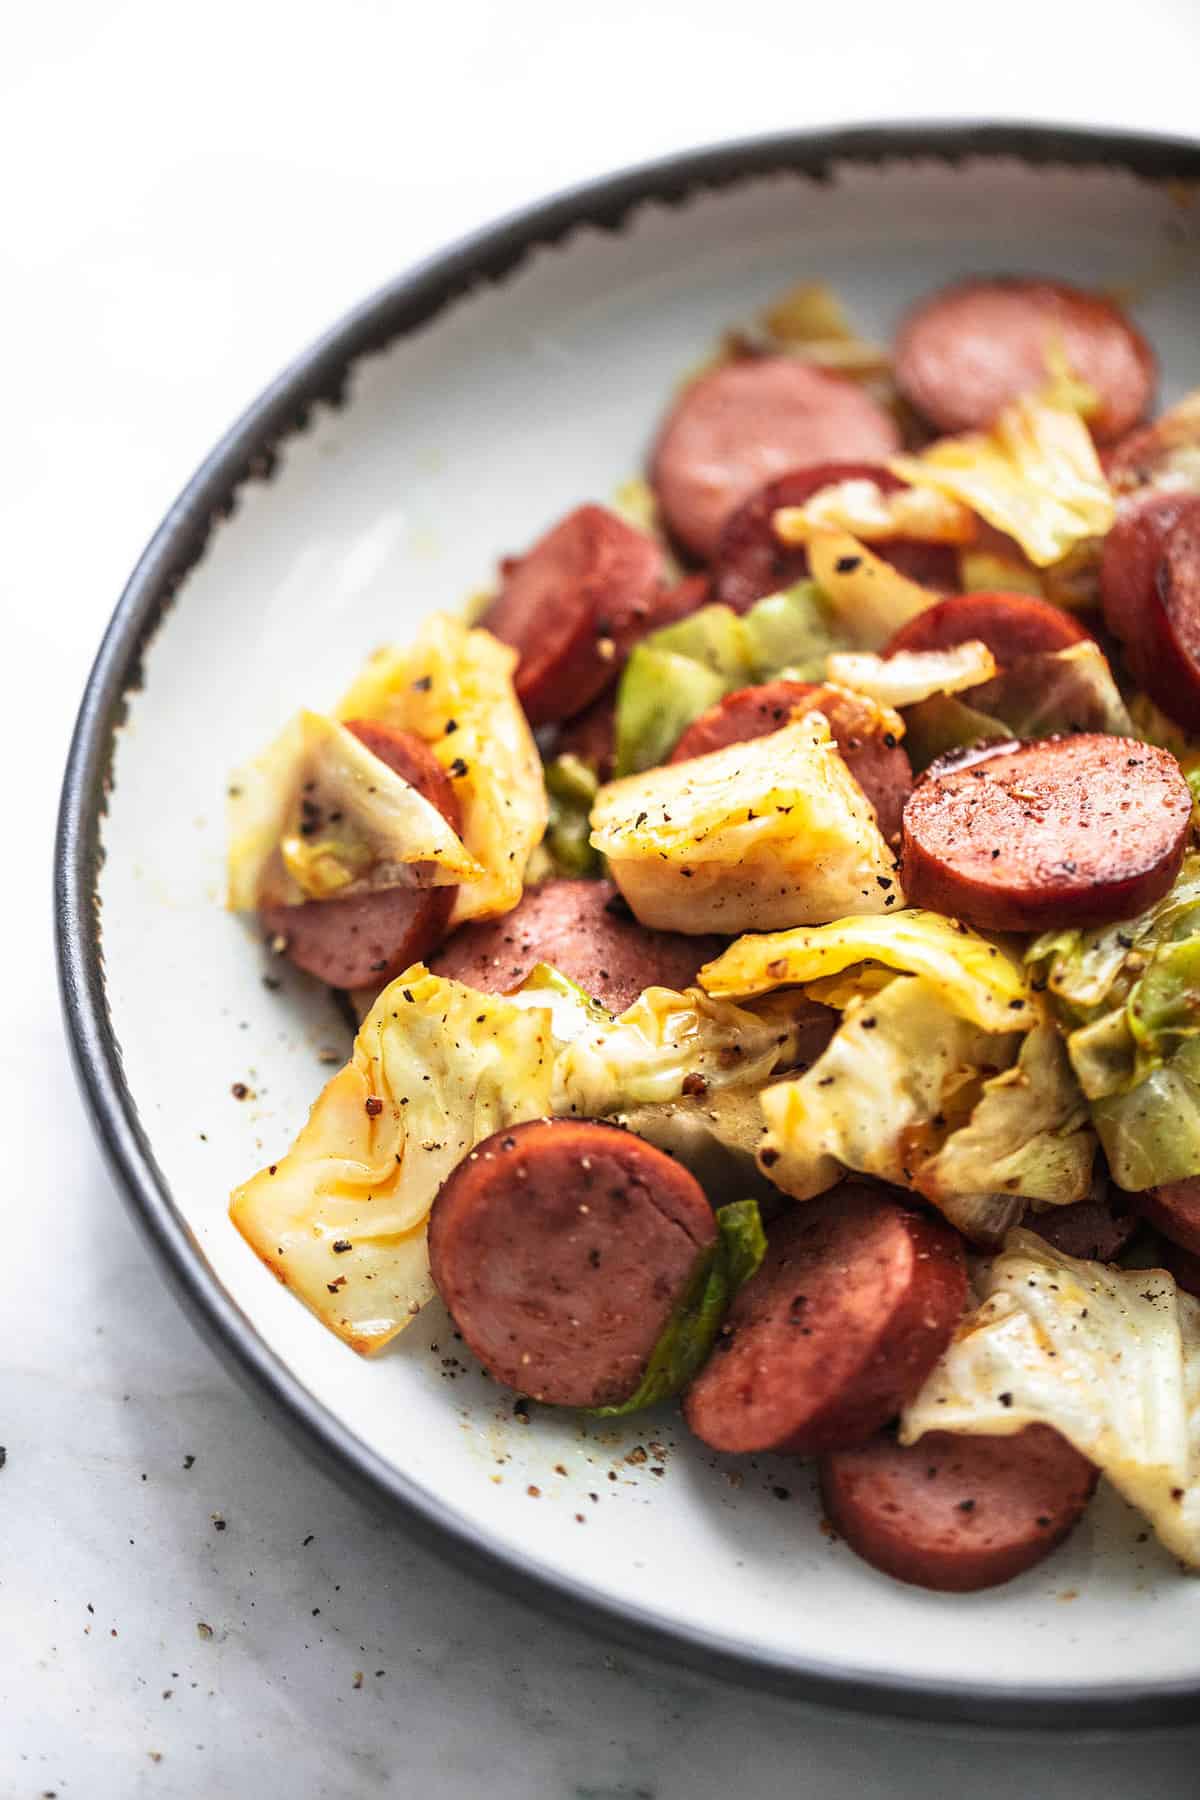 Easy 30-minute Sausage and Cabbage Skillet healthy dinner meal recipe | lecremedelacrumb.com